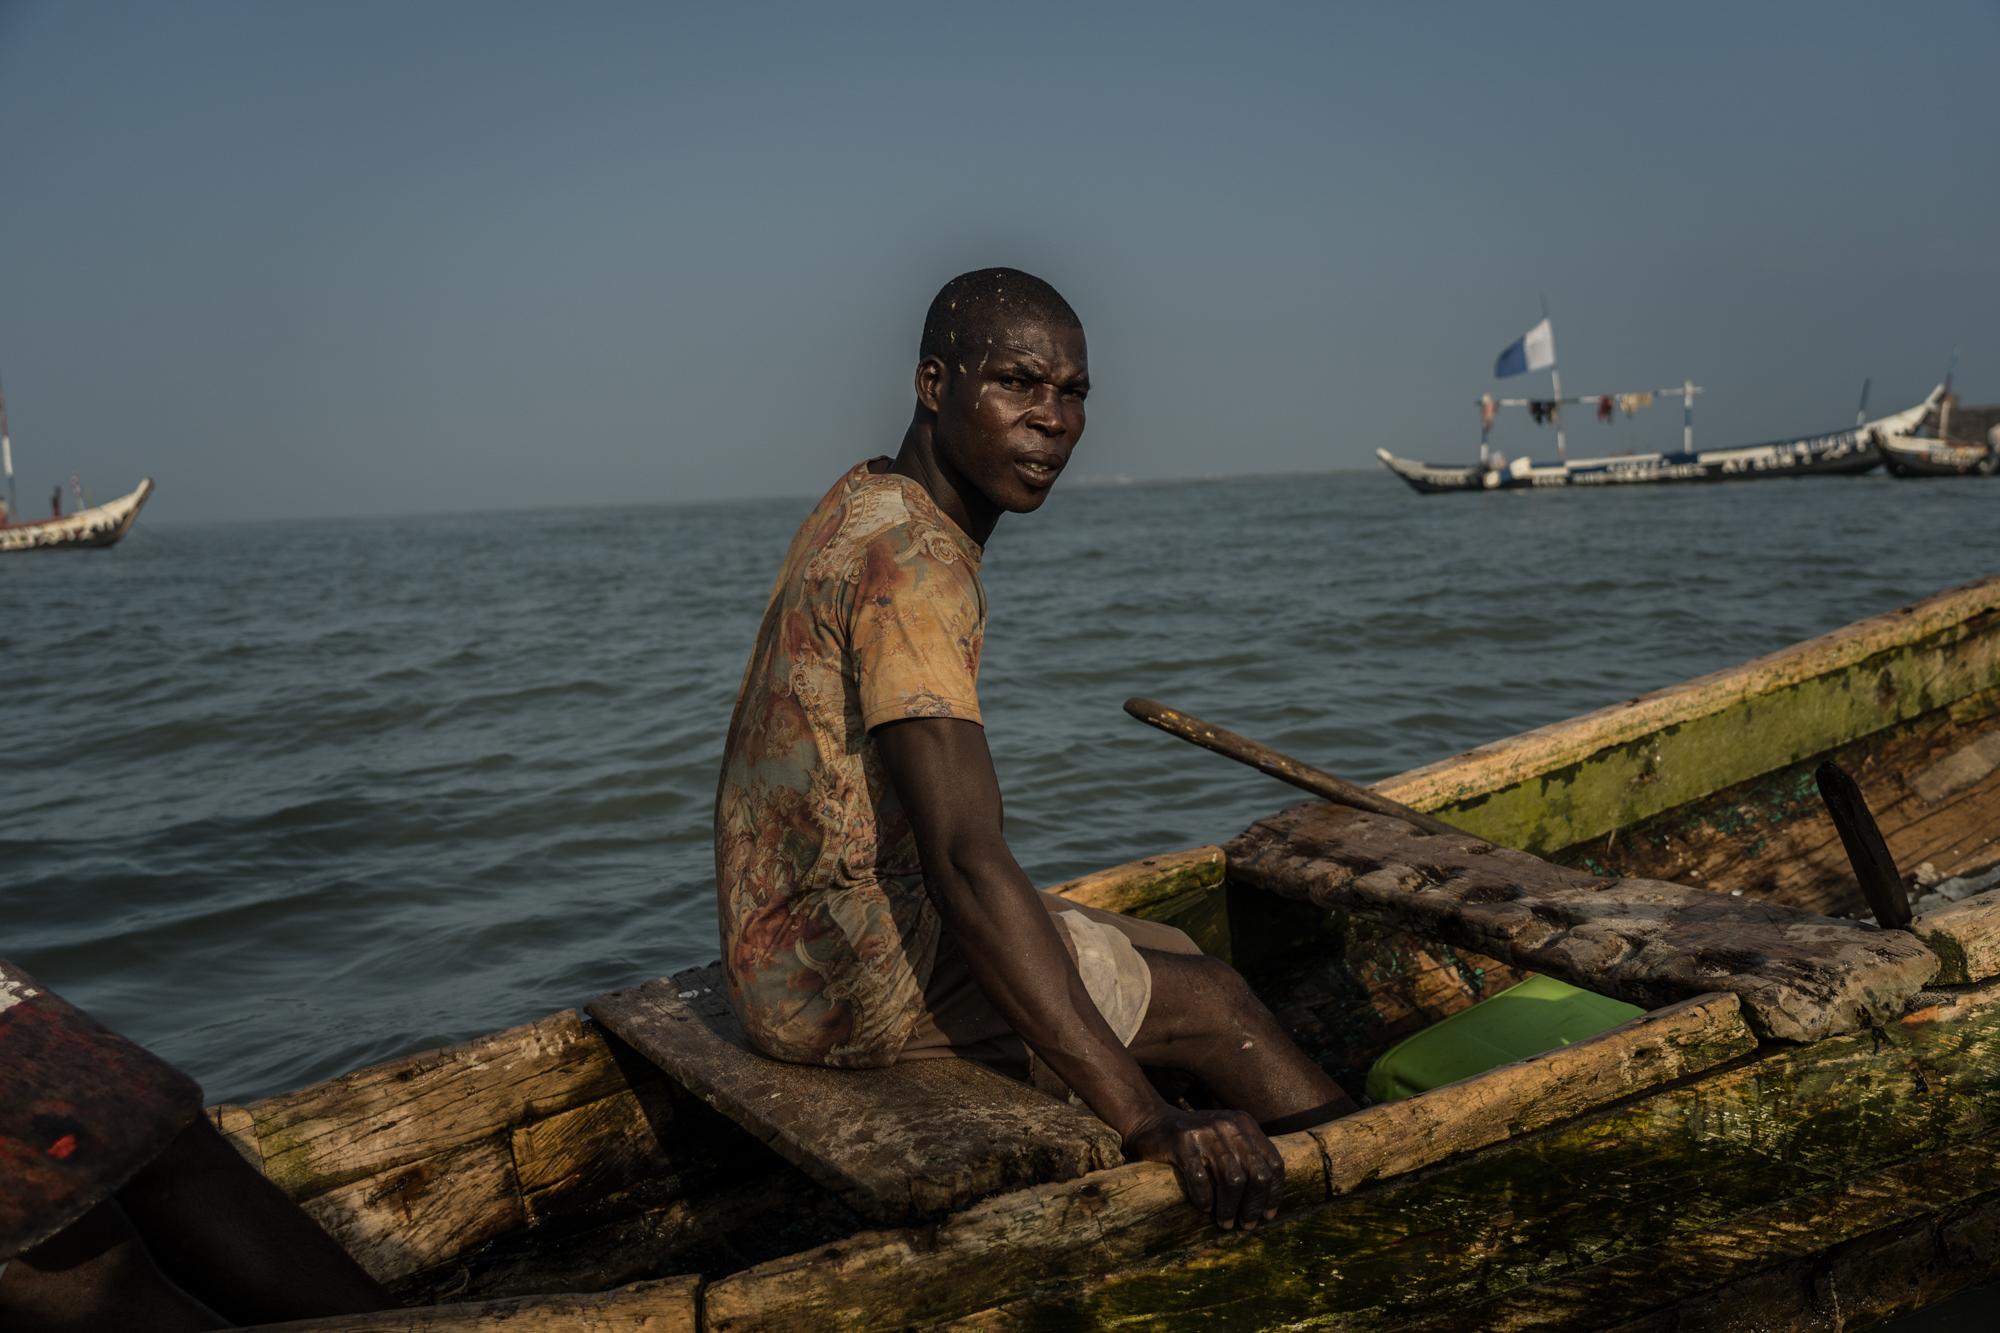 Eric Quaye Ade, a Ghanaian fisherman, sits in his boat in the waters at the Gulf of Guinea where he has been working for almost 20 years.